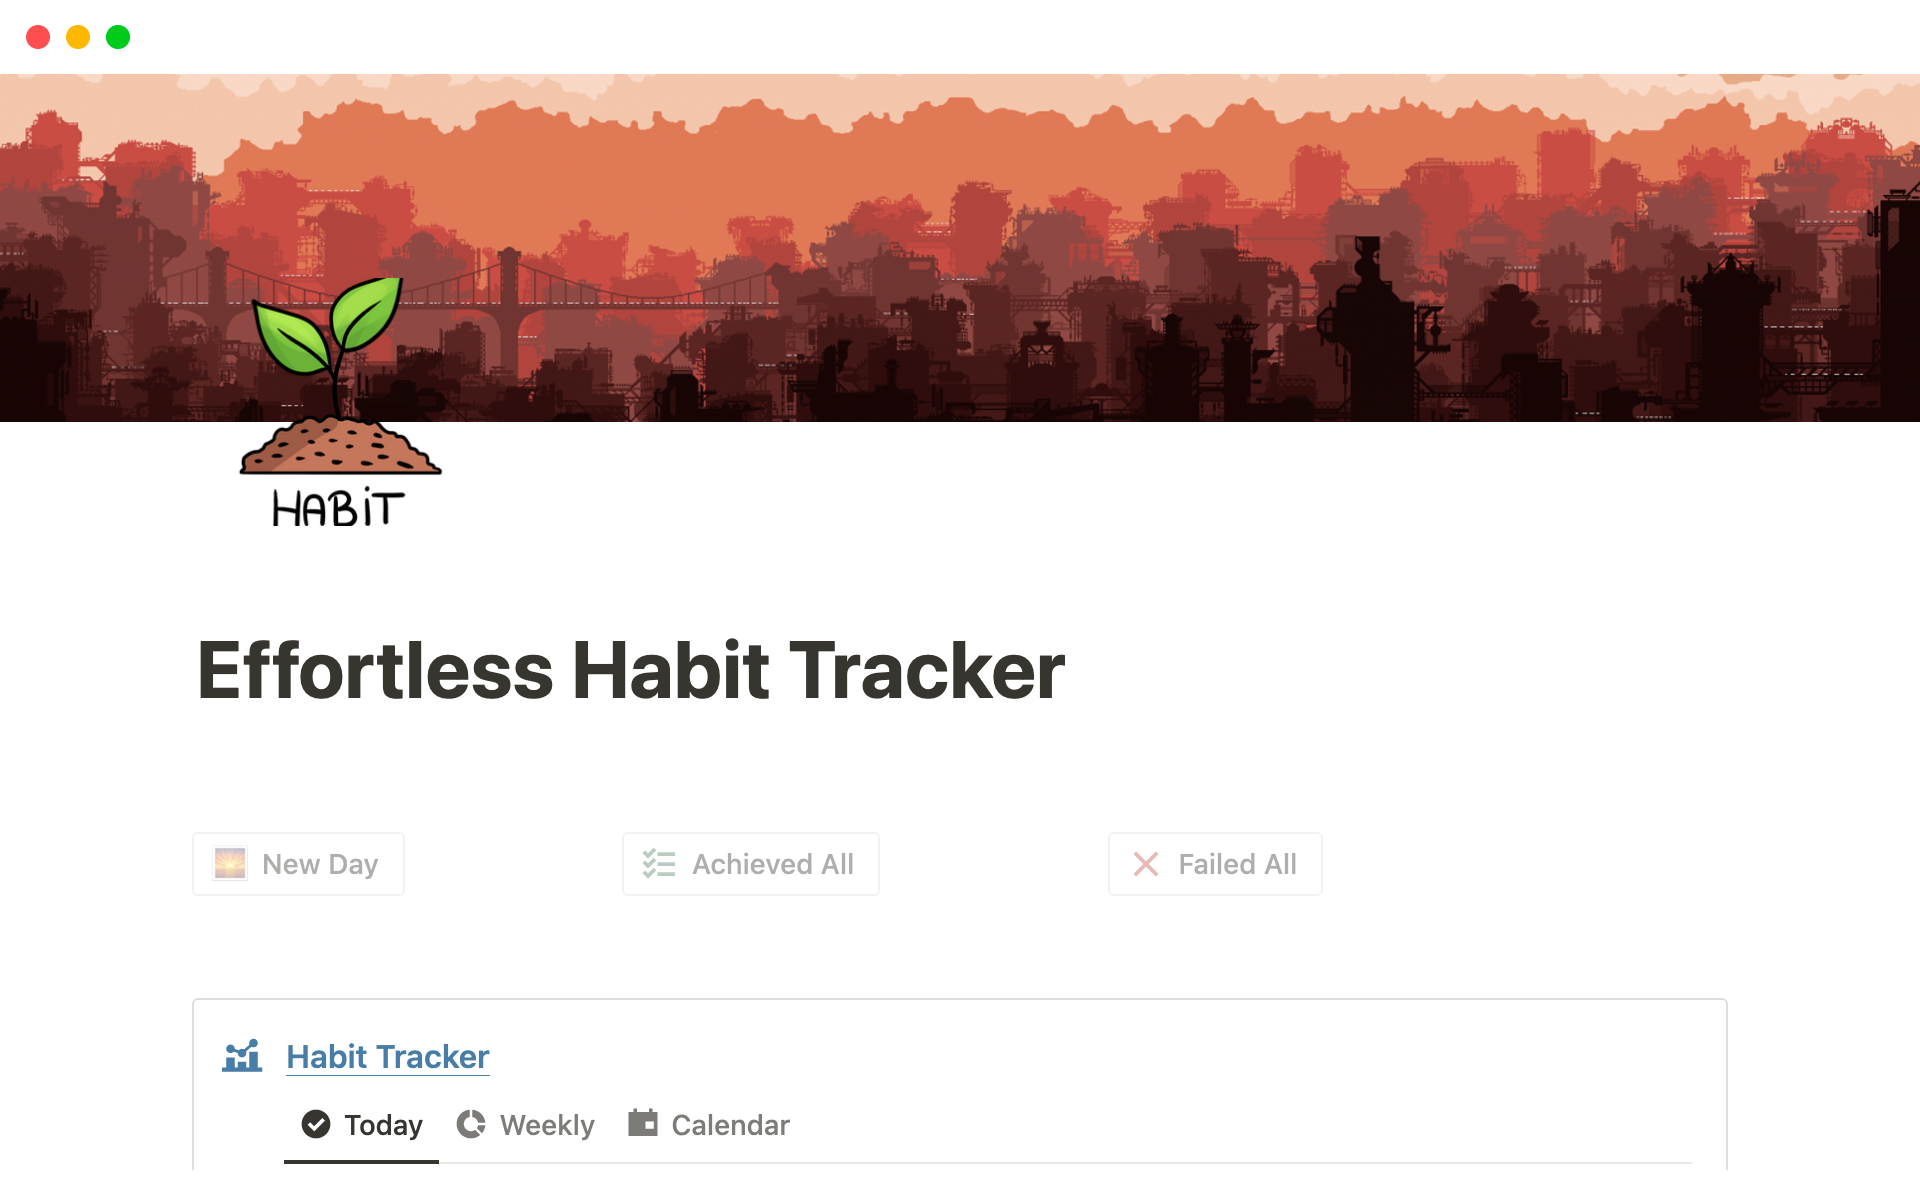 The Effortless Habit Tracker Notion Template helps individuals establish positive routines and leave behind bad habits by providing daily, weekly, and calendar views to easily track up to 4 habits.